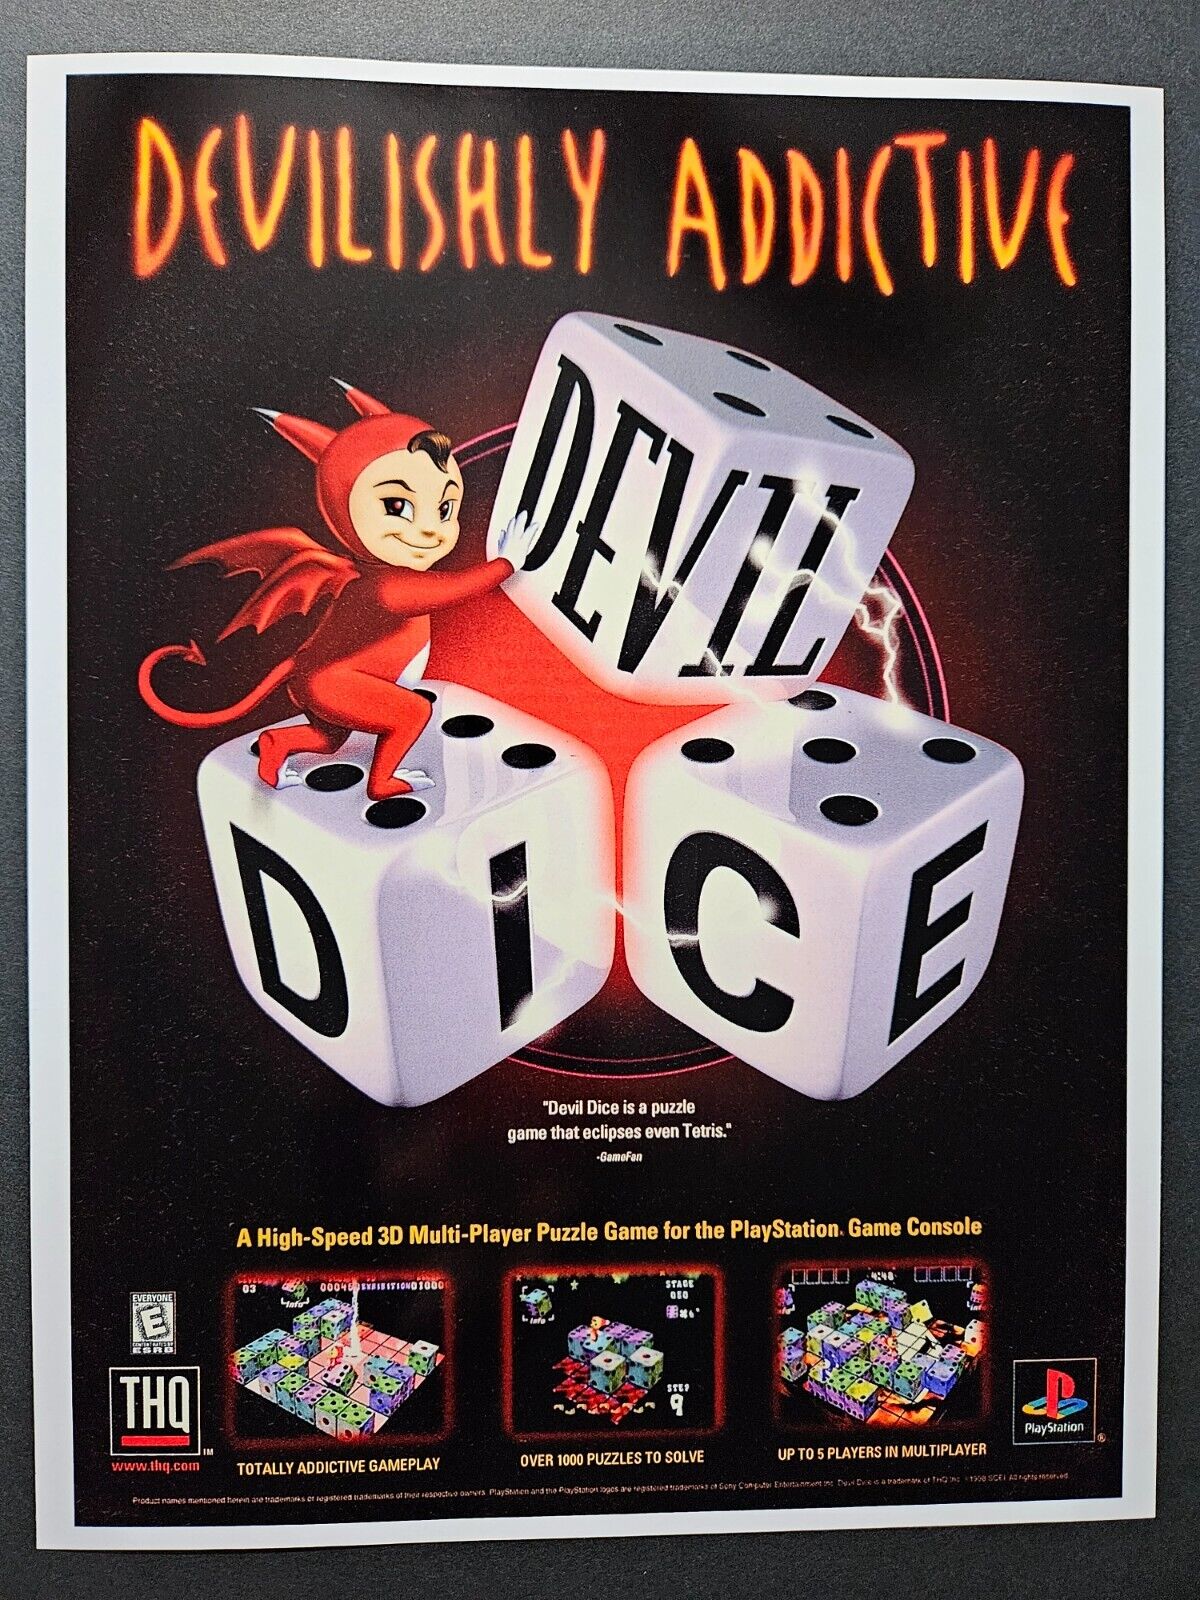 Devil Dice Playstation 1 PS1 Game 1998 Promo Ad Art Wall Print Poster - Glossy